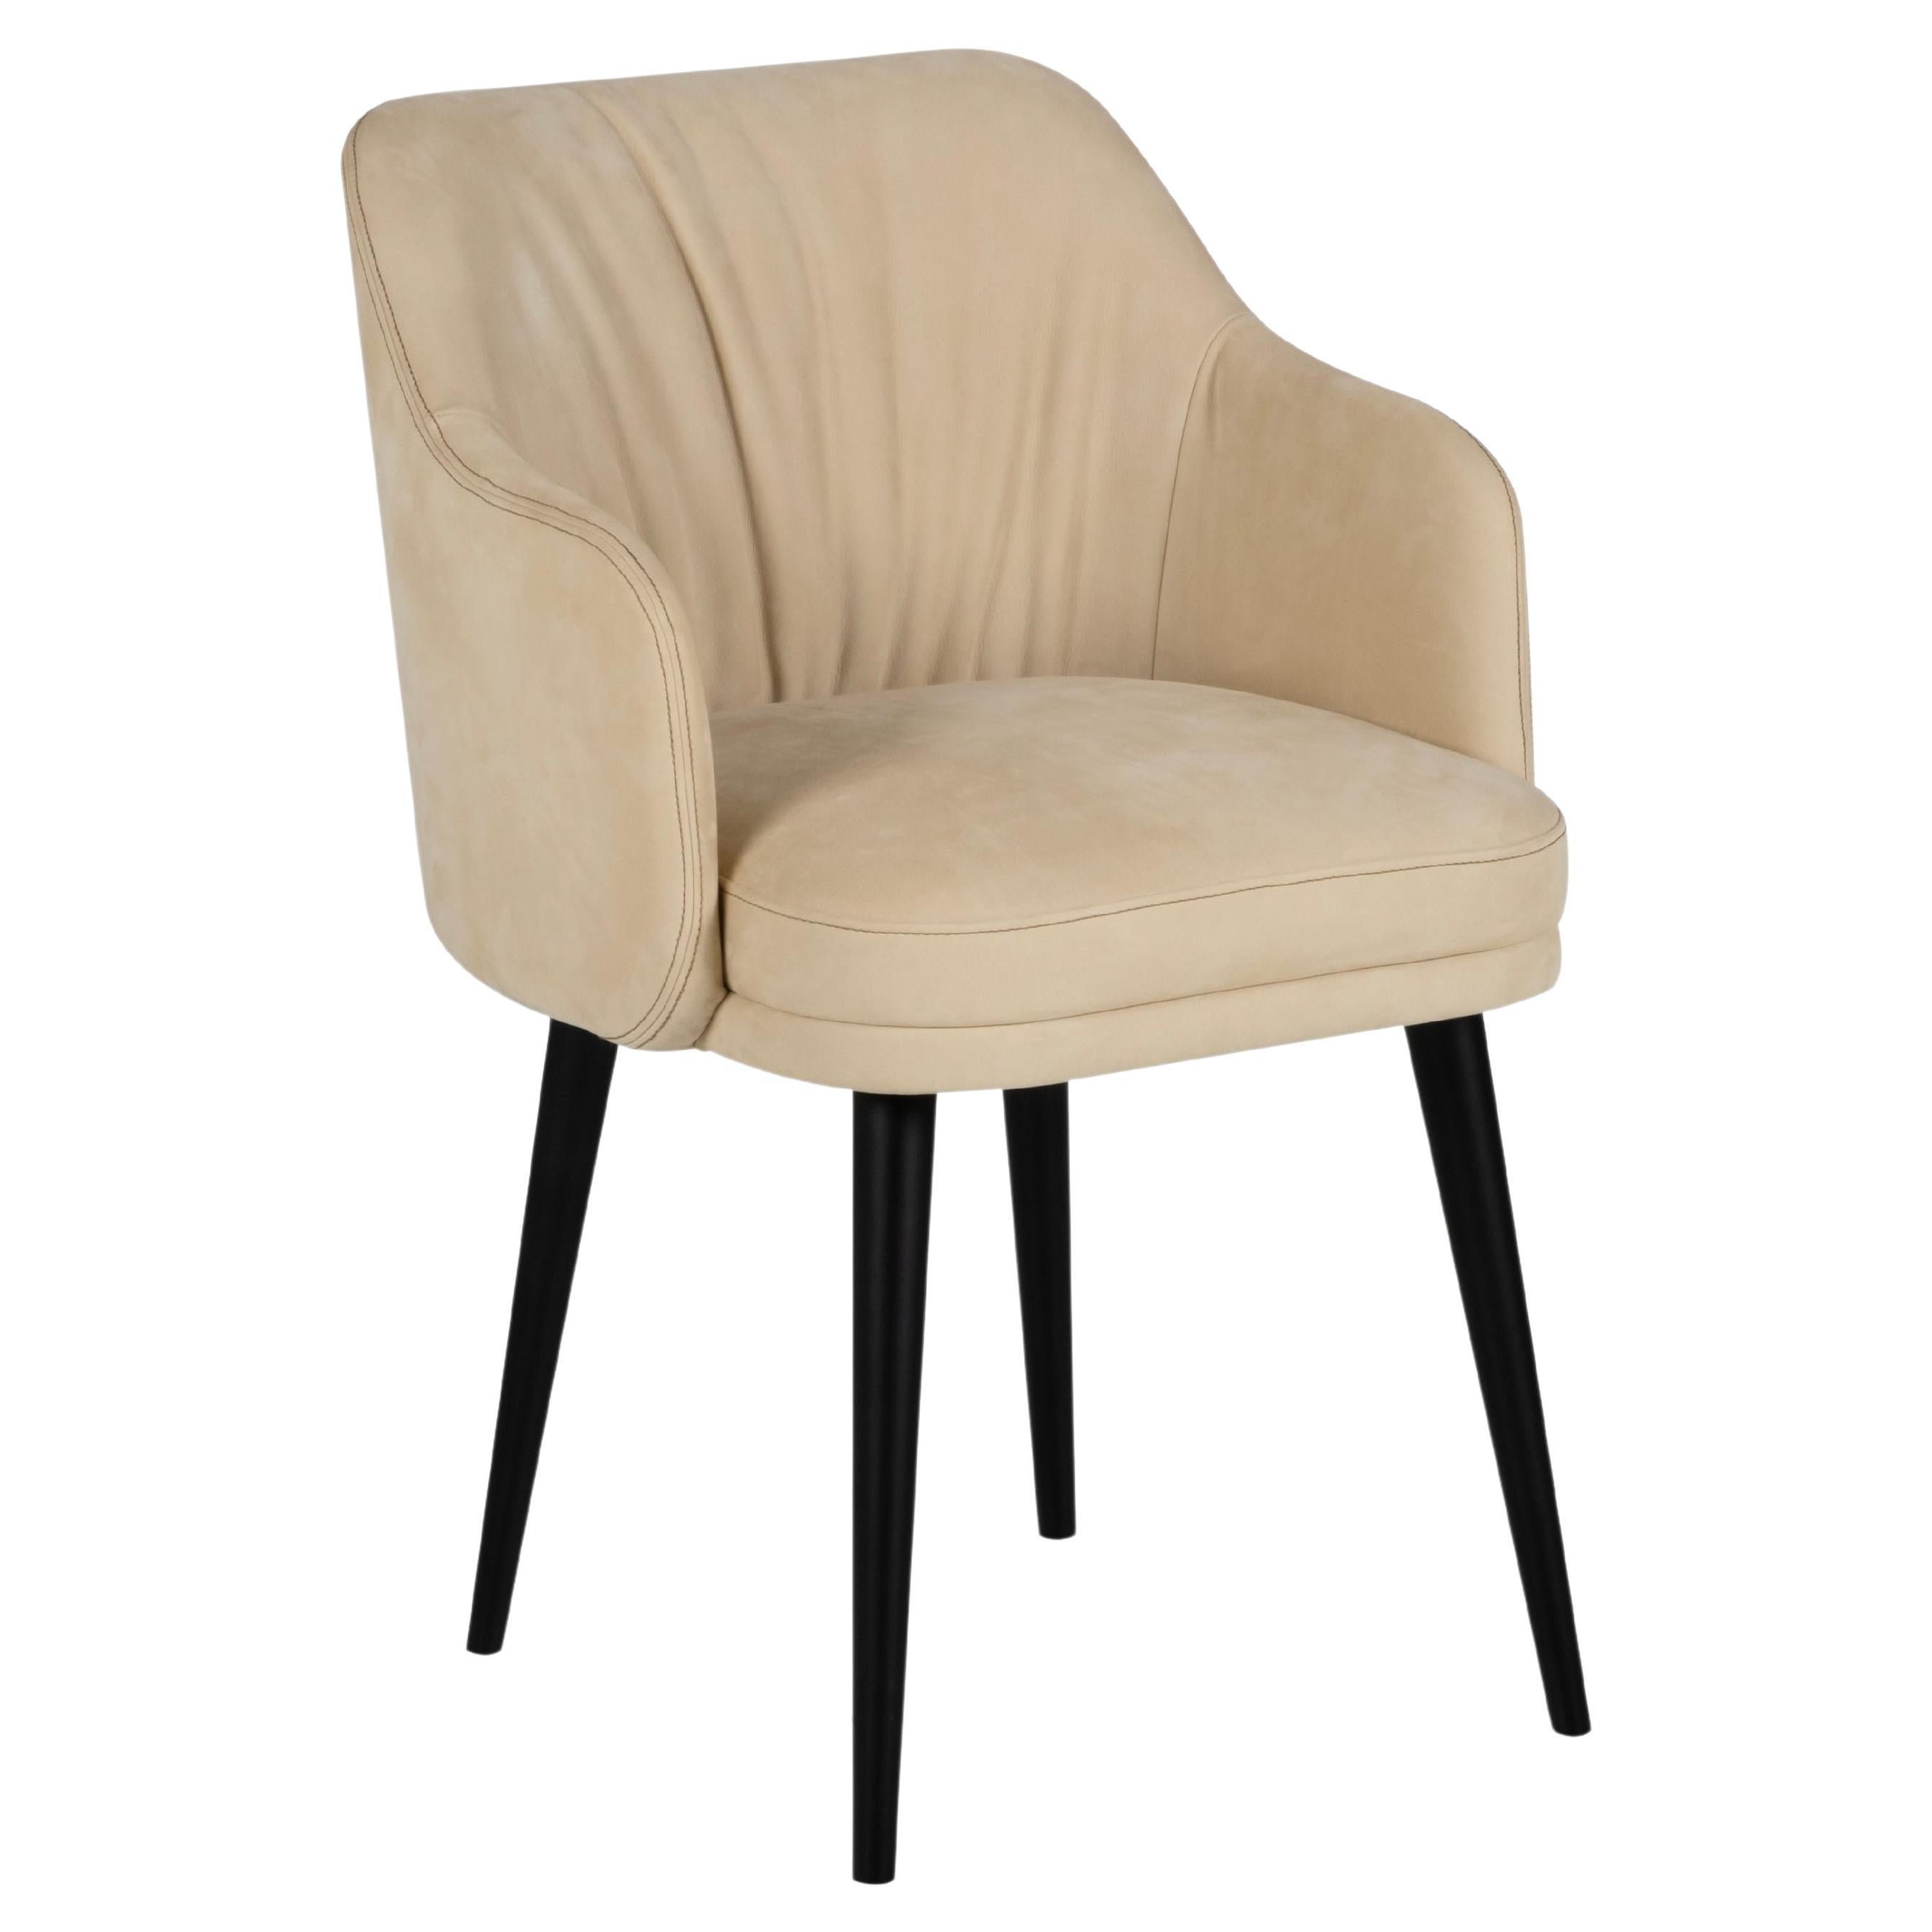 Modern Margot Dining Chairs, Nubuck Leather, Handmade in Portugal by Greenapple